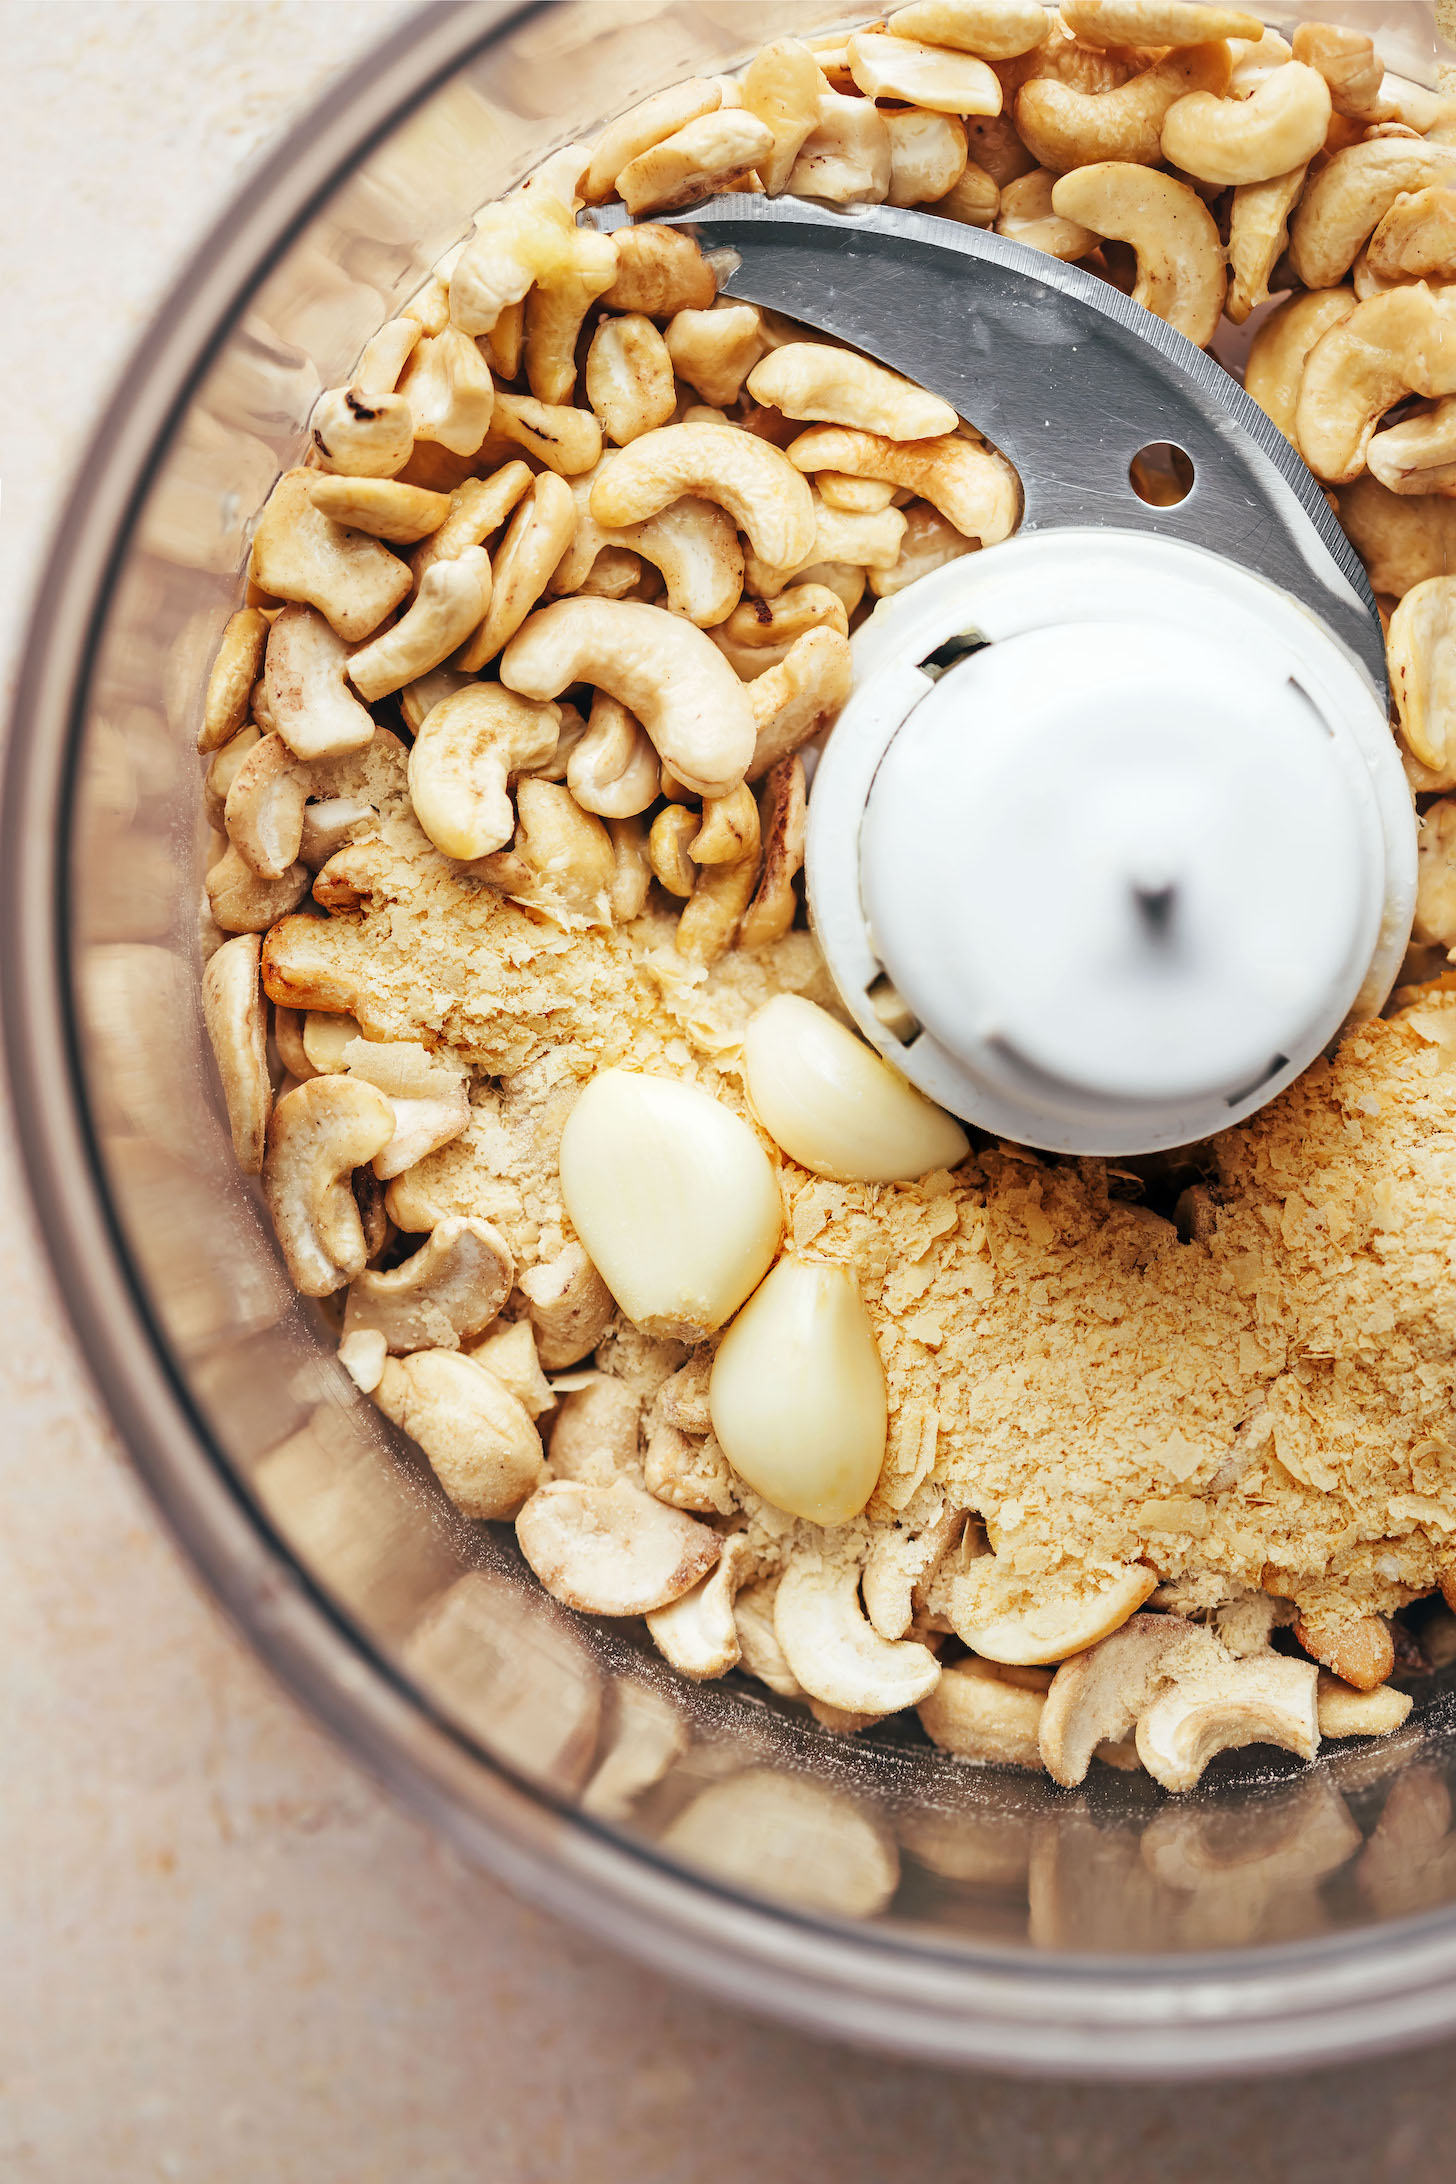 Food processor with cashews, nutritional yeast, and garlic